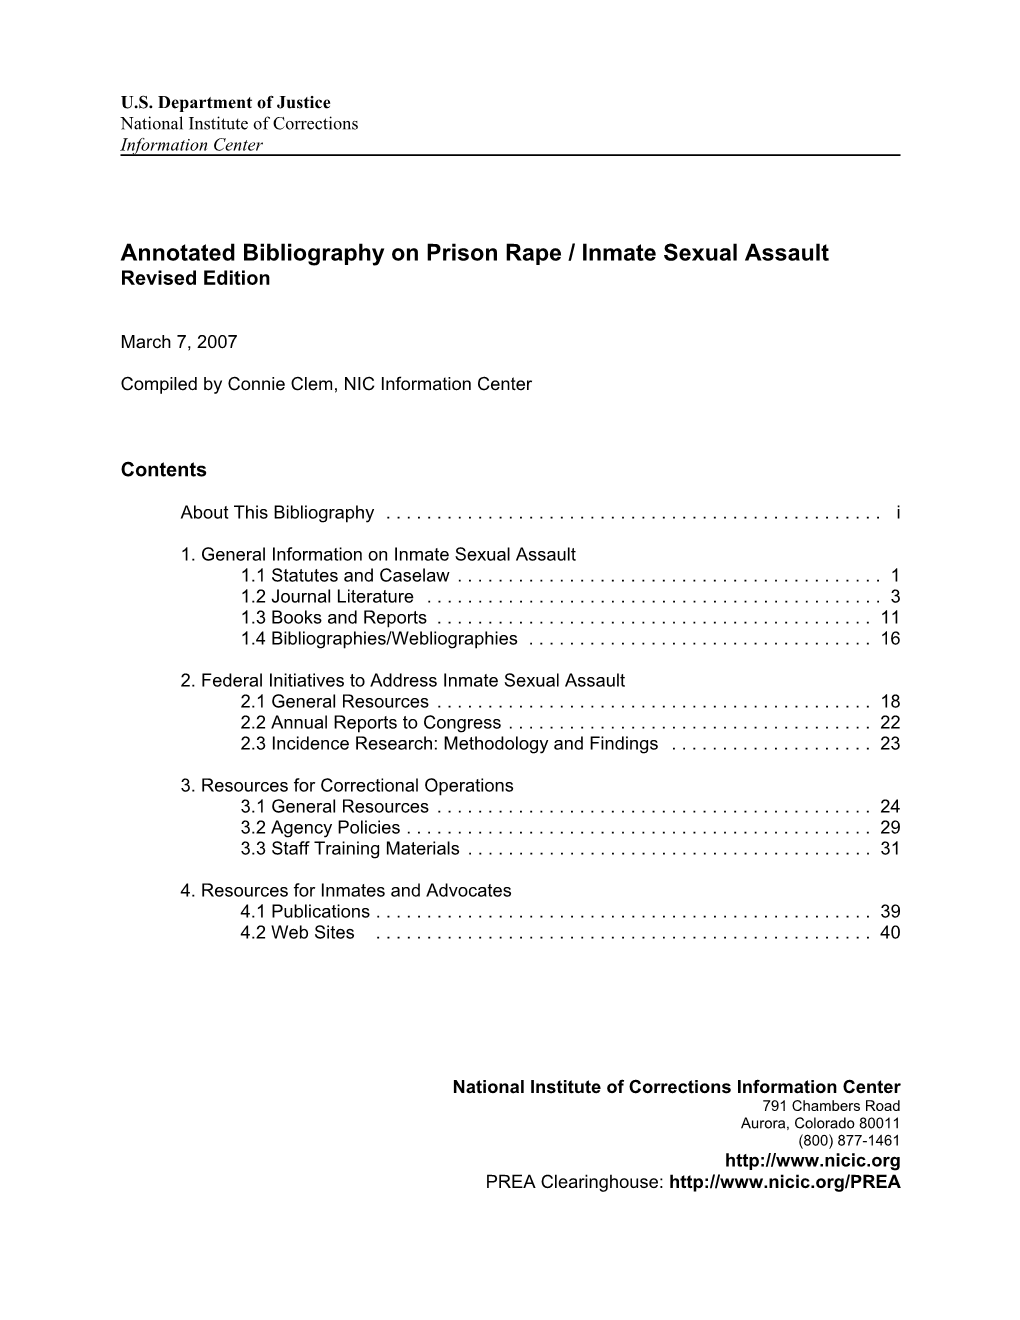 Annotated Bibliography on Prison Rape / Inmate Sexual Assault Revised Edition